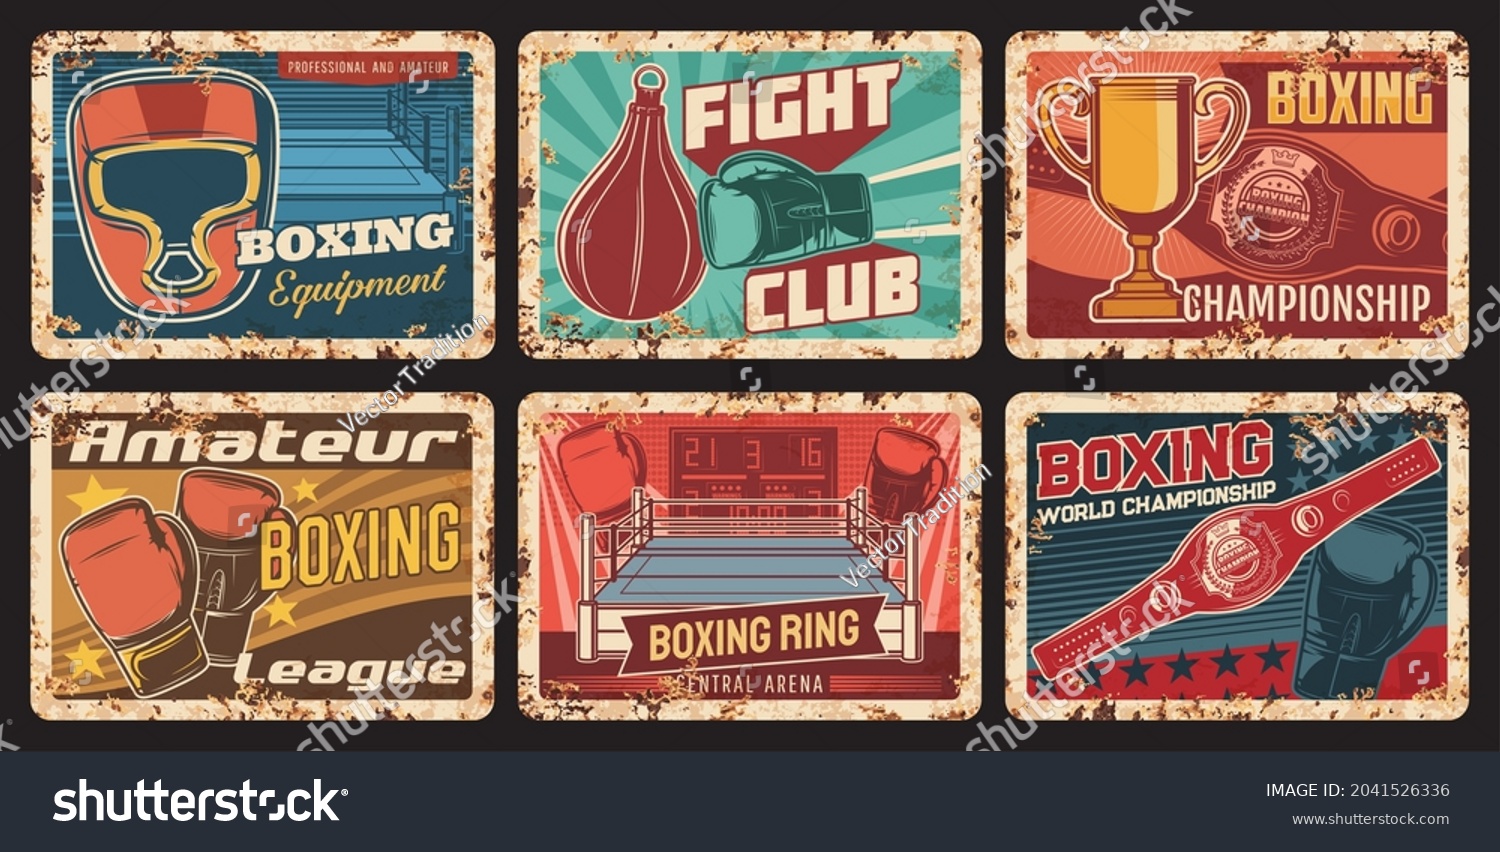 SVG of Boxing championship, sport equipment shop rusty metal plates. Boxing gloves and headgear, punching bag, champion cup and belt, ring vector. Fight club, amateur sport league retro banners svg